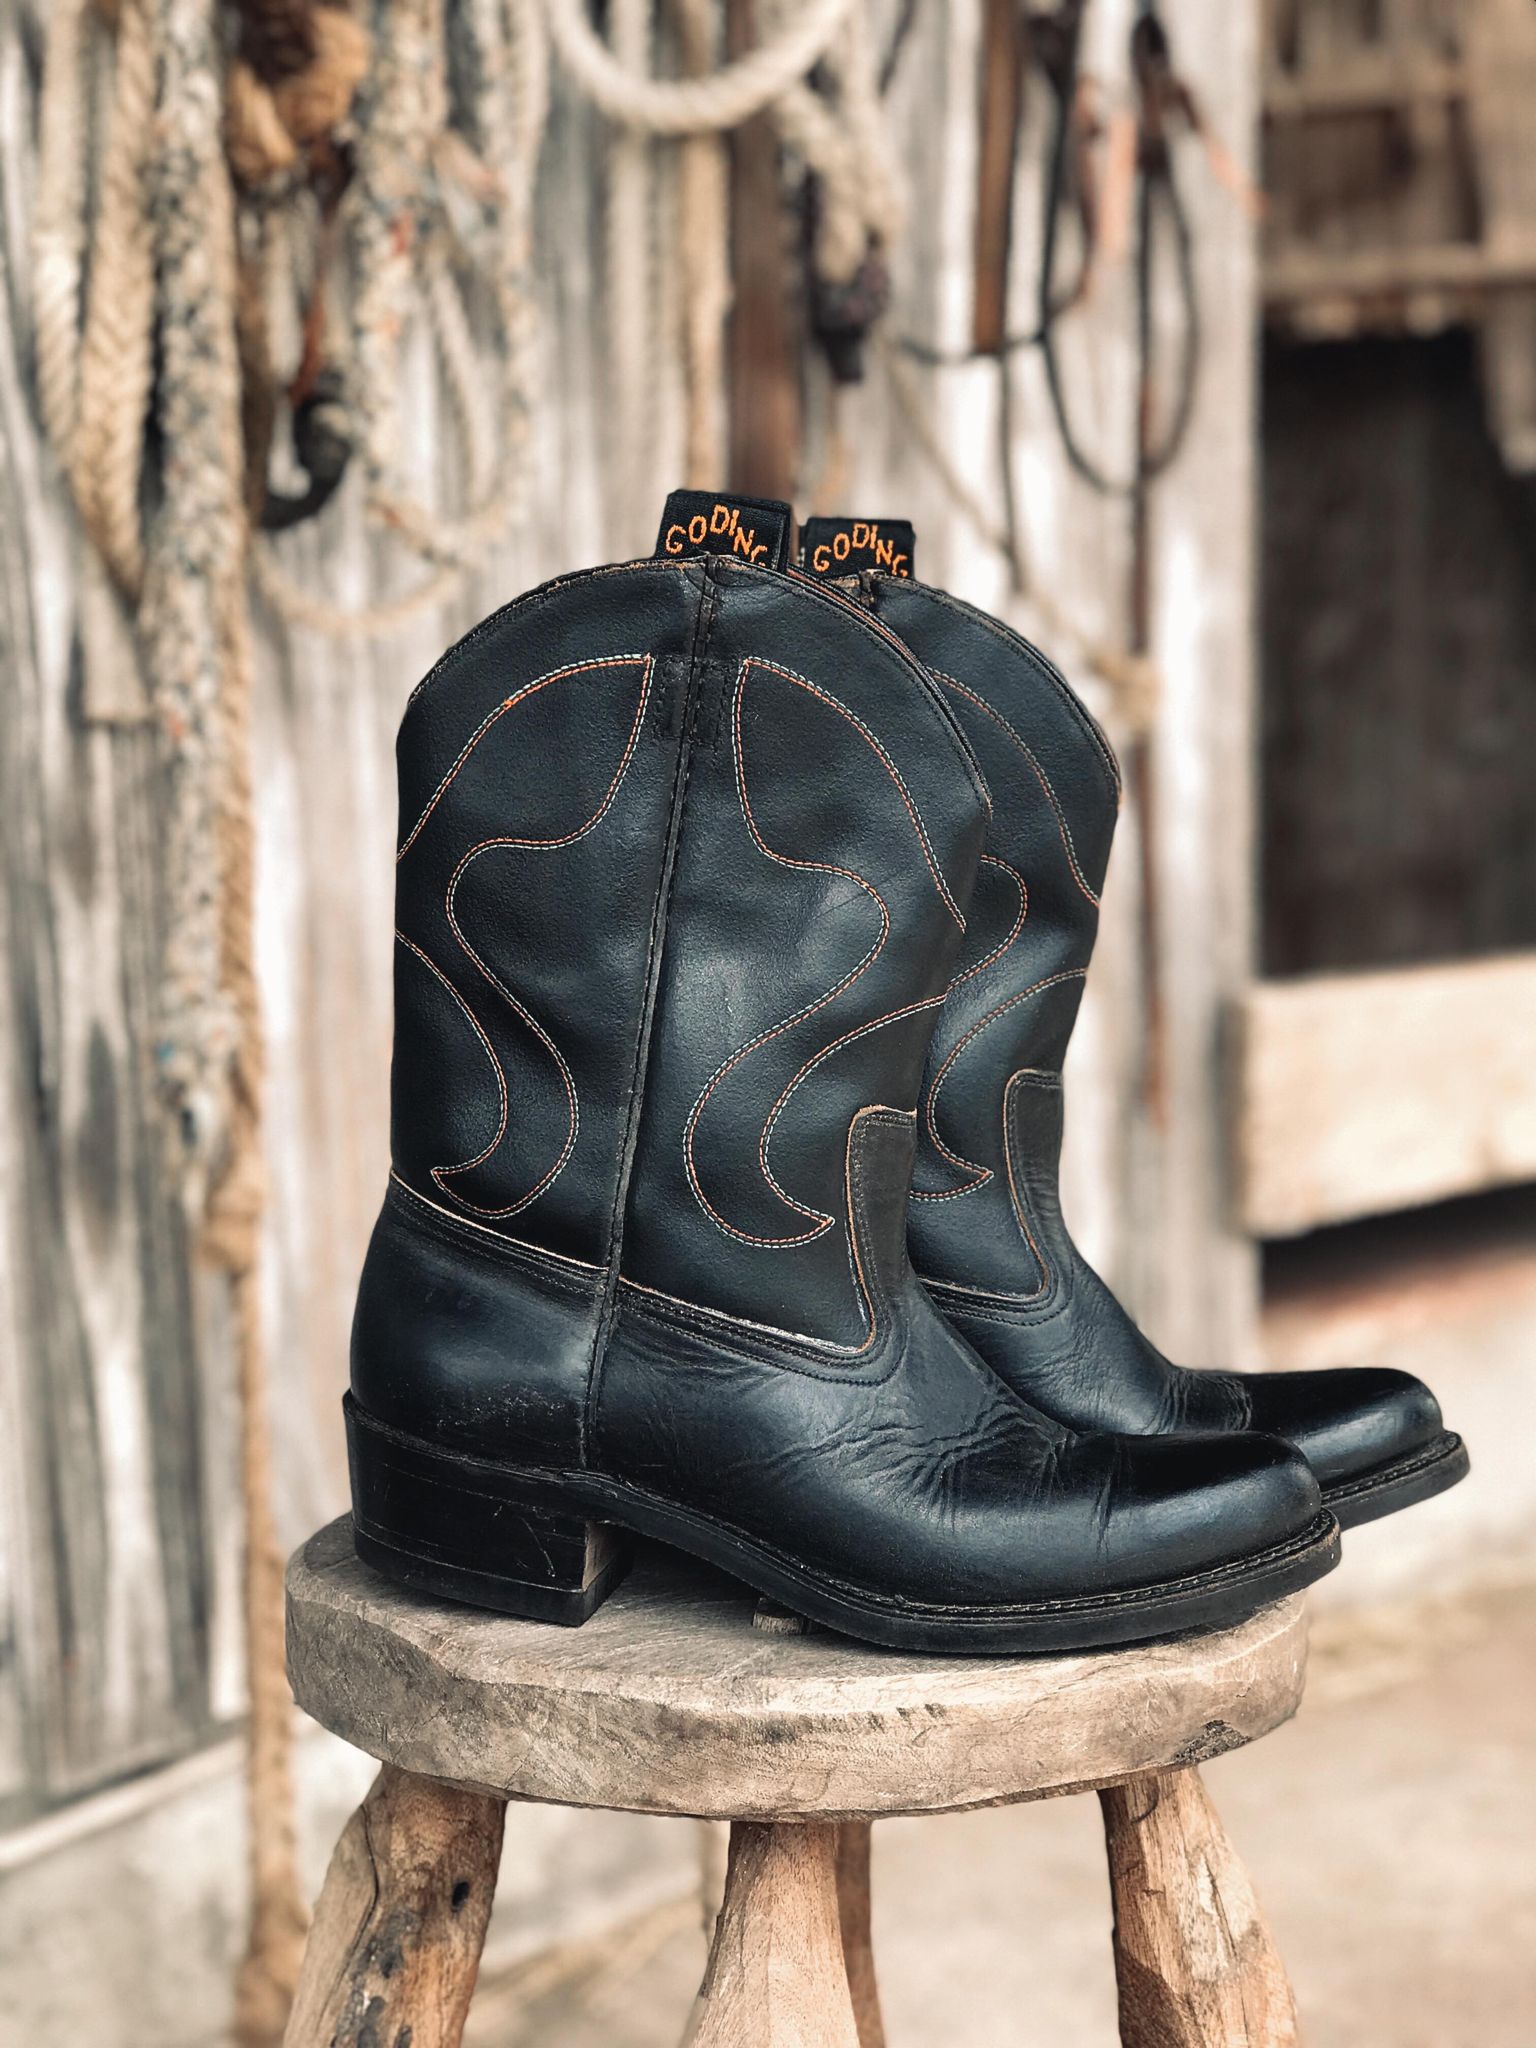 1950's Cowboy Boots by the Goding Co.